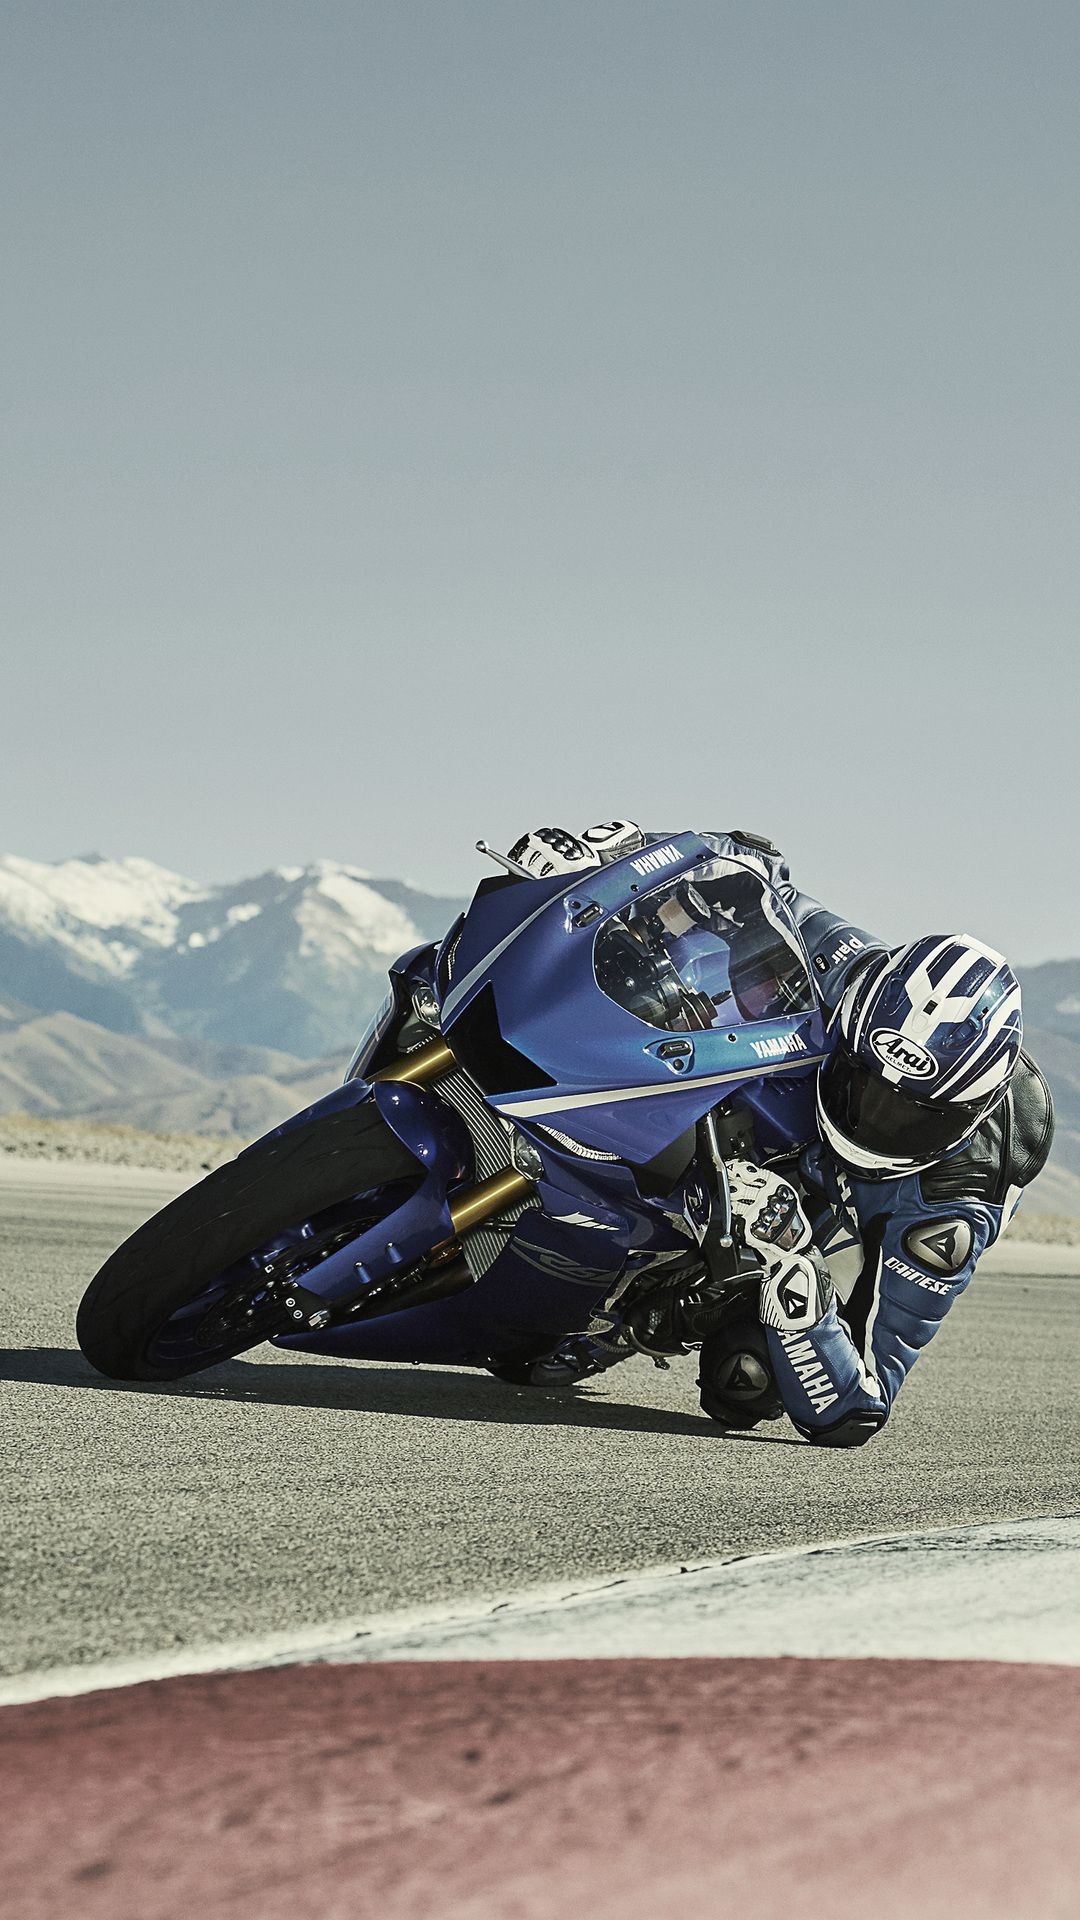 Motorcycle Racing: Yamaha R6, Speed Track In The Desert, Racing Gear, Safety Equipment. 1080x1920 Full HD Wallpaper.